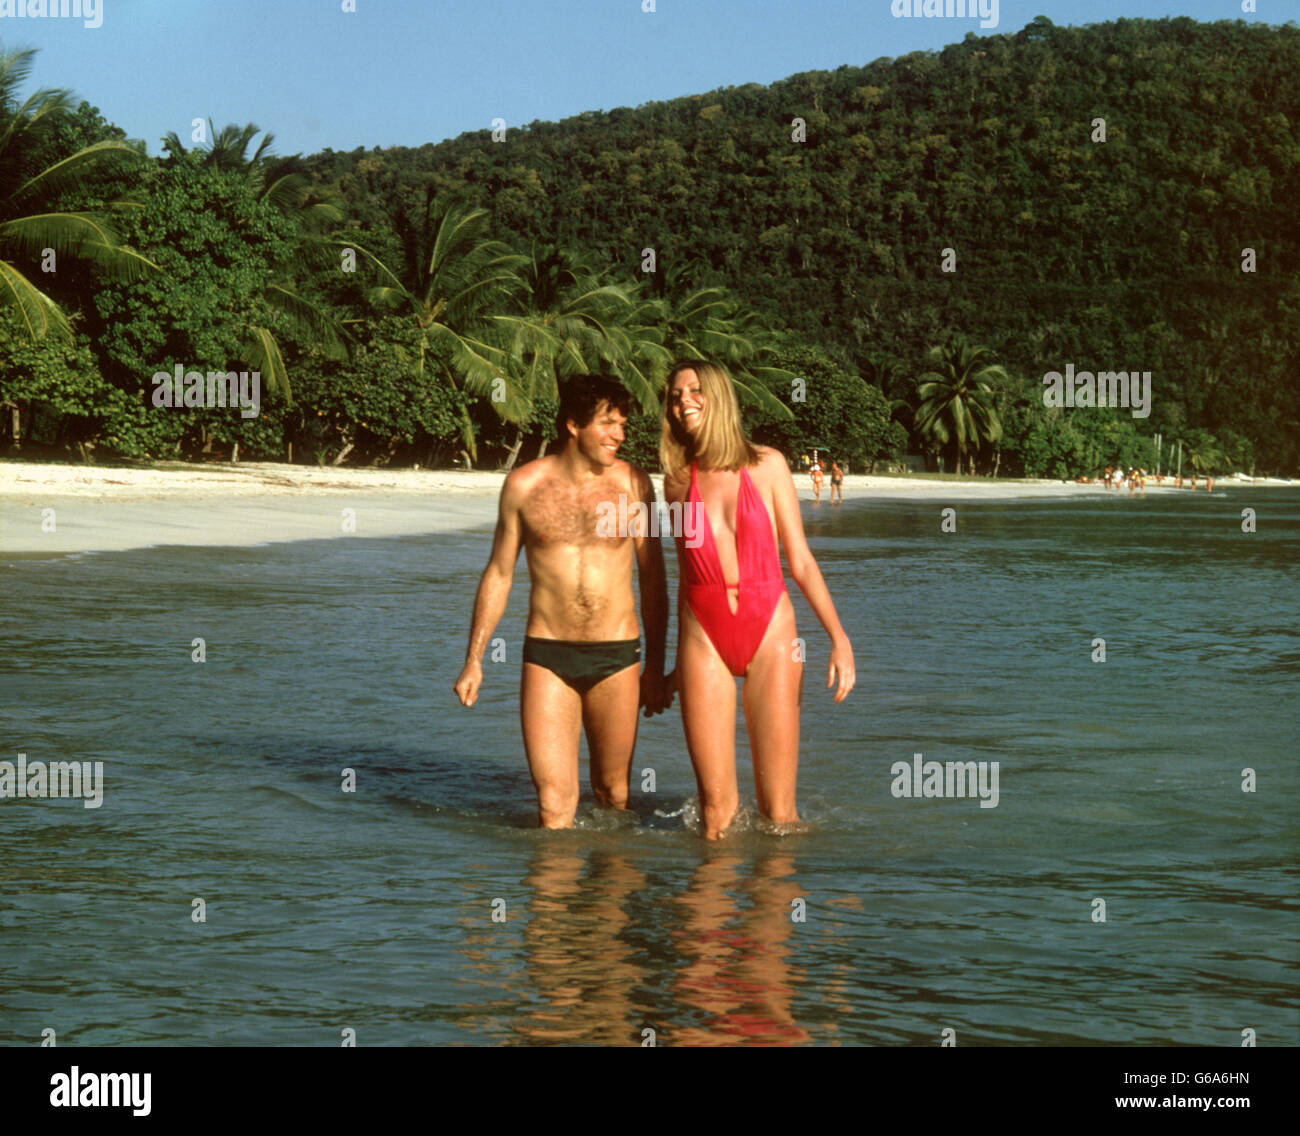 1970s 1980s COUPLE WALKING TOGETHER OCEAN TROPICAL BEACH HOLDING HANDS Stock Photo